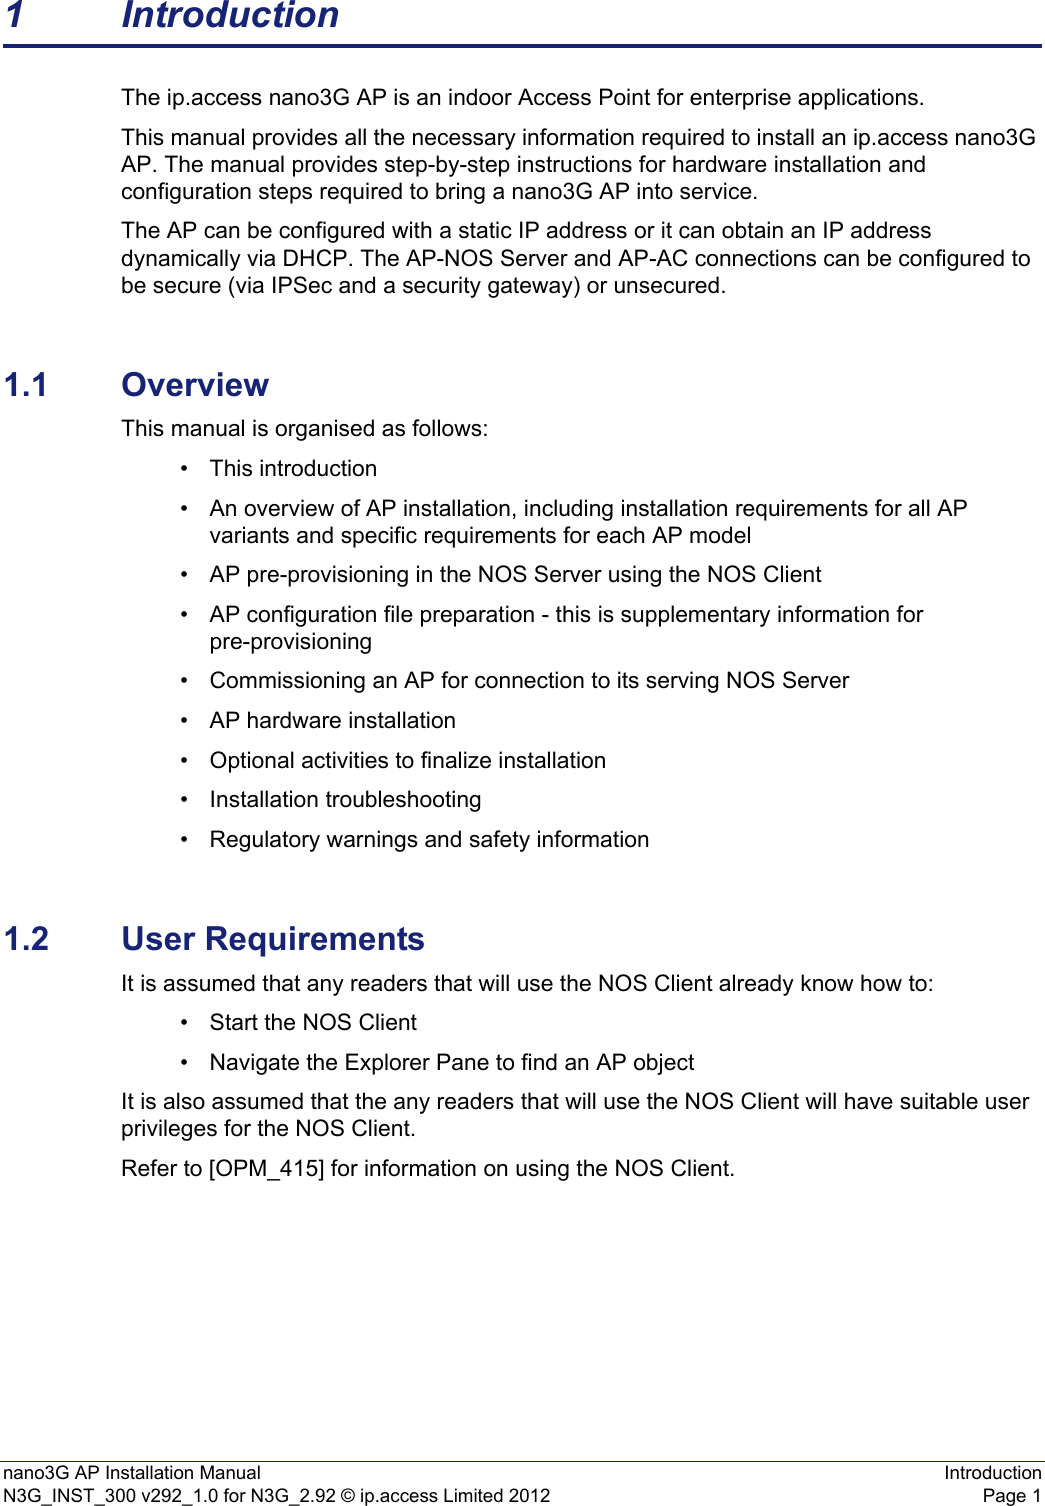 nano3G AP Installation Manual IntroductionN3G_INST_300 v292_1.0 for N3G_2.92 © ip.access Limited 2012 Page 11 IntroductionThe ip.access nano3G AP is an indoor Access Point for enterprise applications.This manual provides all the necessary information required to install an ip.access nano3G AP. The manual provides step-by-step instructions for hardware installation and configuration steps required to bring a nano3G AP into service.The AP can be configured with a static IP address or it can obtain an IP address dynamically via DHCP. The AP-NOS Server and AP-AC connections can be configured to be secure (via IPSec and a security gateway) or unsecured.1.1 OverviewThis manual is organised as follows:• This introduction• An overview of AP installation, including installation requirements for all AP variants and specific requirements for each AP model • AP pre-provisioning in the NOS Server using the NOS Client• AP configuration file preparation - this is supplementary information for pre-provisioning• Commissioning an AP for connection to its serving NOS Server • AP hardware installation• Optional activities to finalize installation• Installation troubleshooting• Regulatory warnings and safety information1.2 User RequirementsIt is assumed that any readers that will use the NOS Client already know how to:• Start the NOS Client• Navigate the Explorer Pane to find an AP object It is also assumed that the any readers that will use the NOS Client will have suitable user privileges for the NOS Client. Refer to [OPM_415] for information on using the NOS Client. 